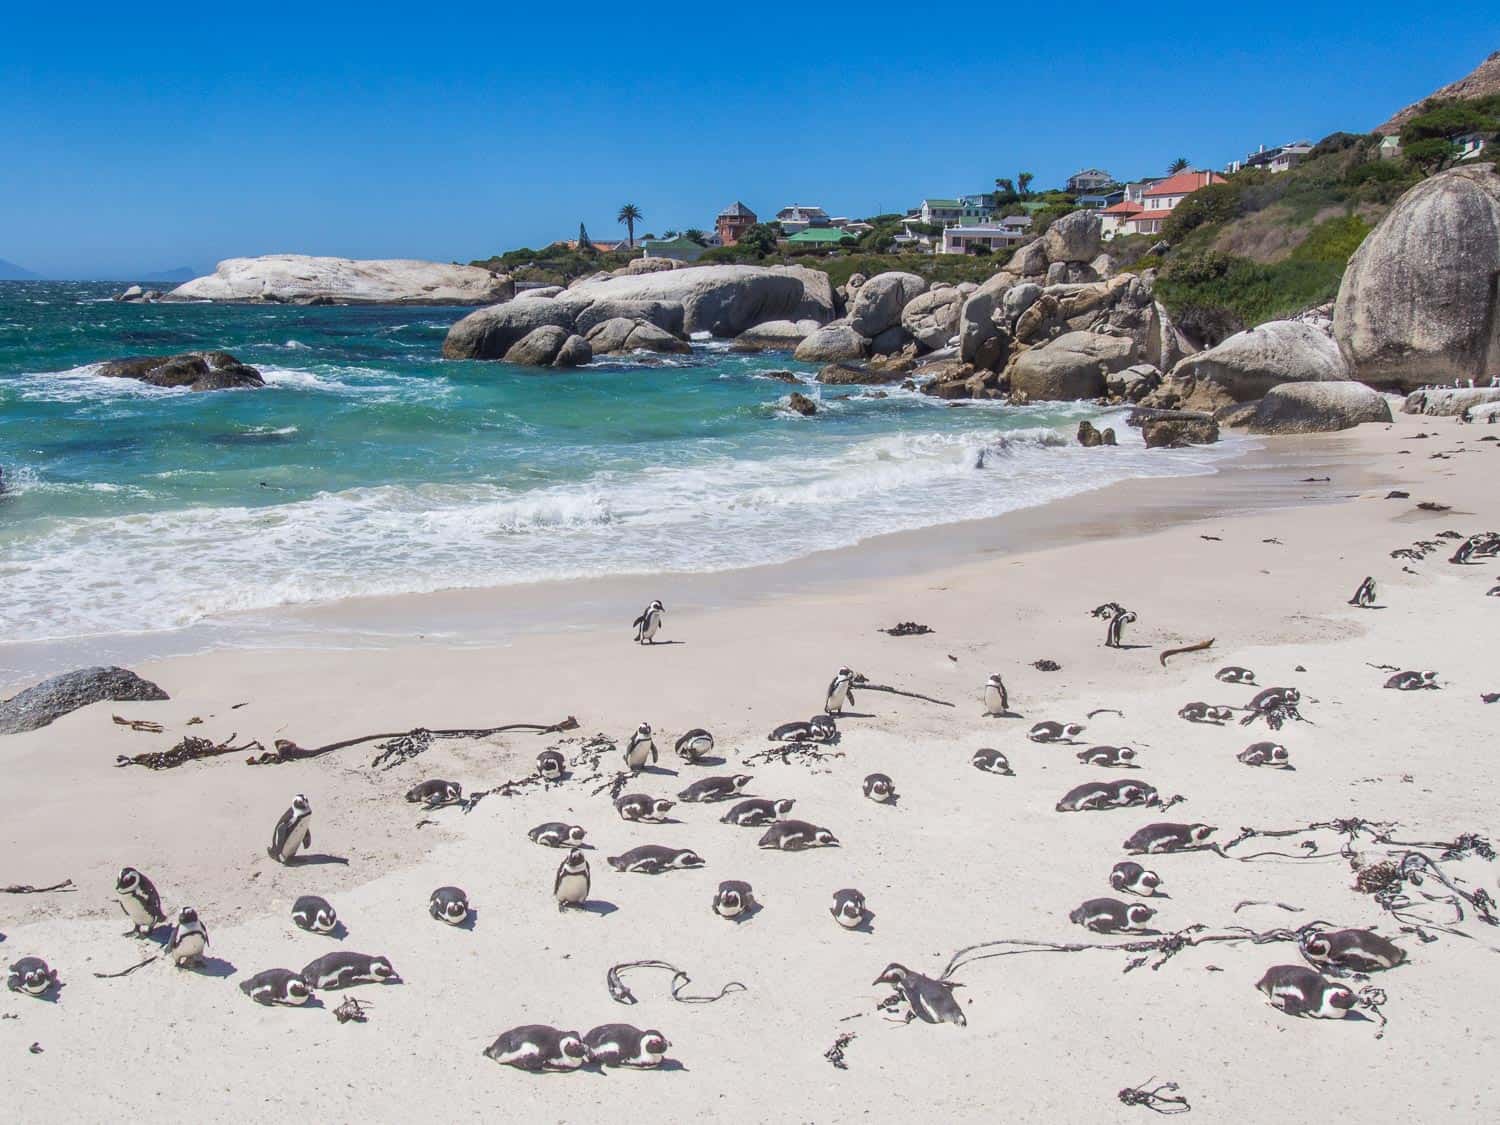 Penguins on Foxy Beach on the Cape Peninsula, South Africa